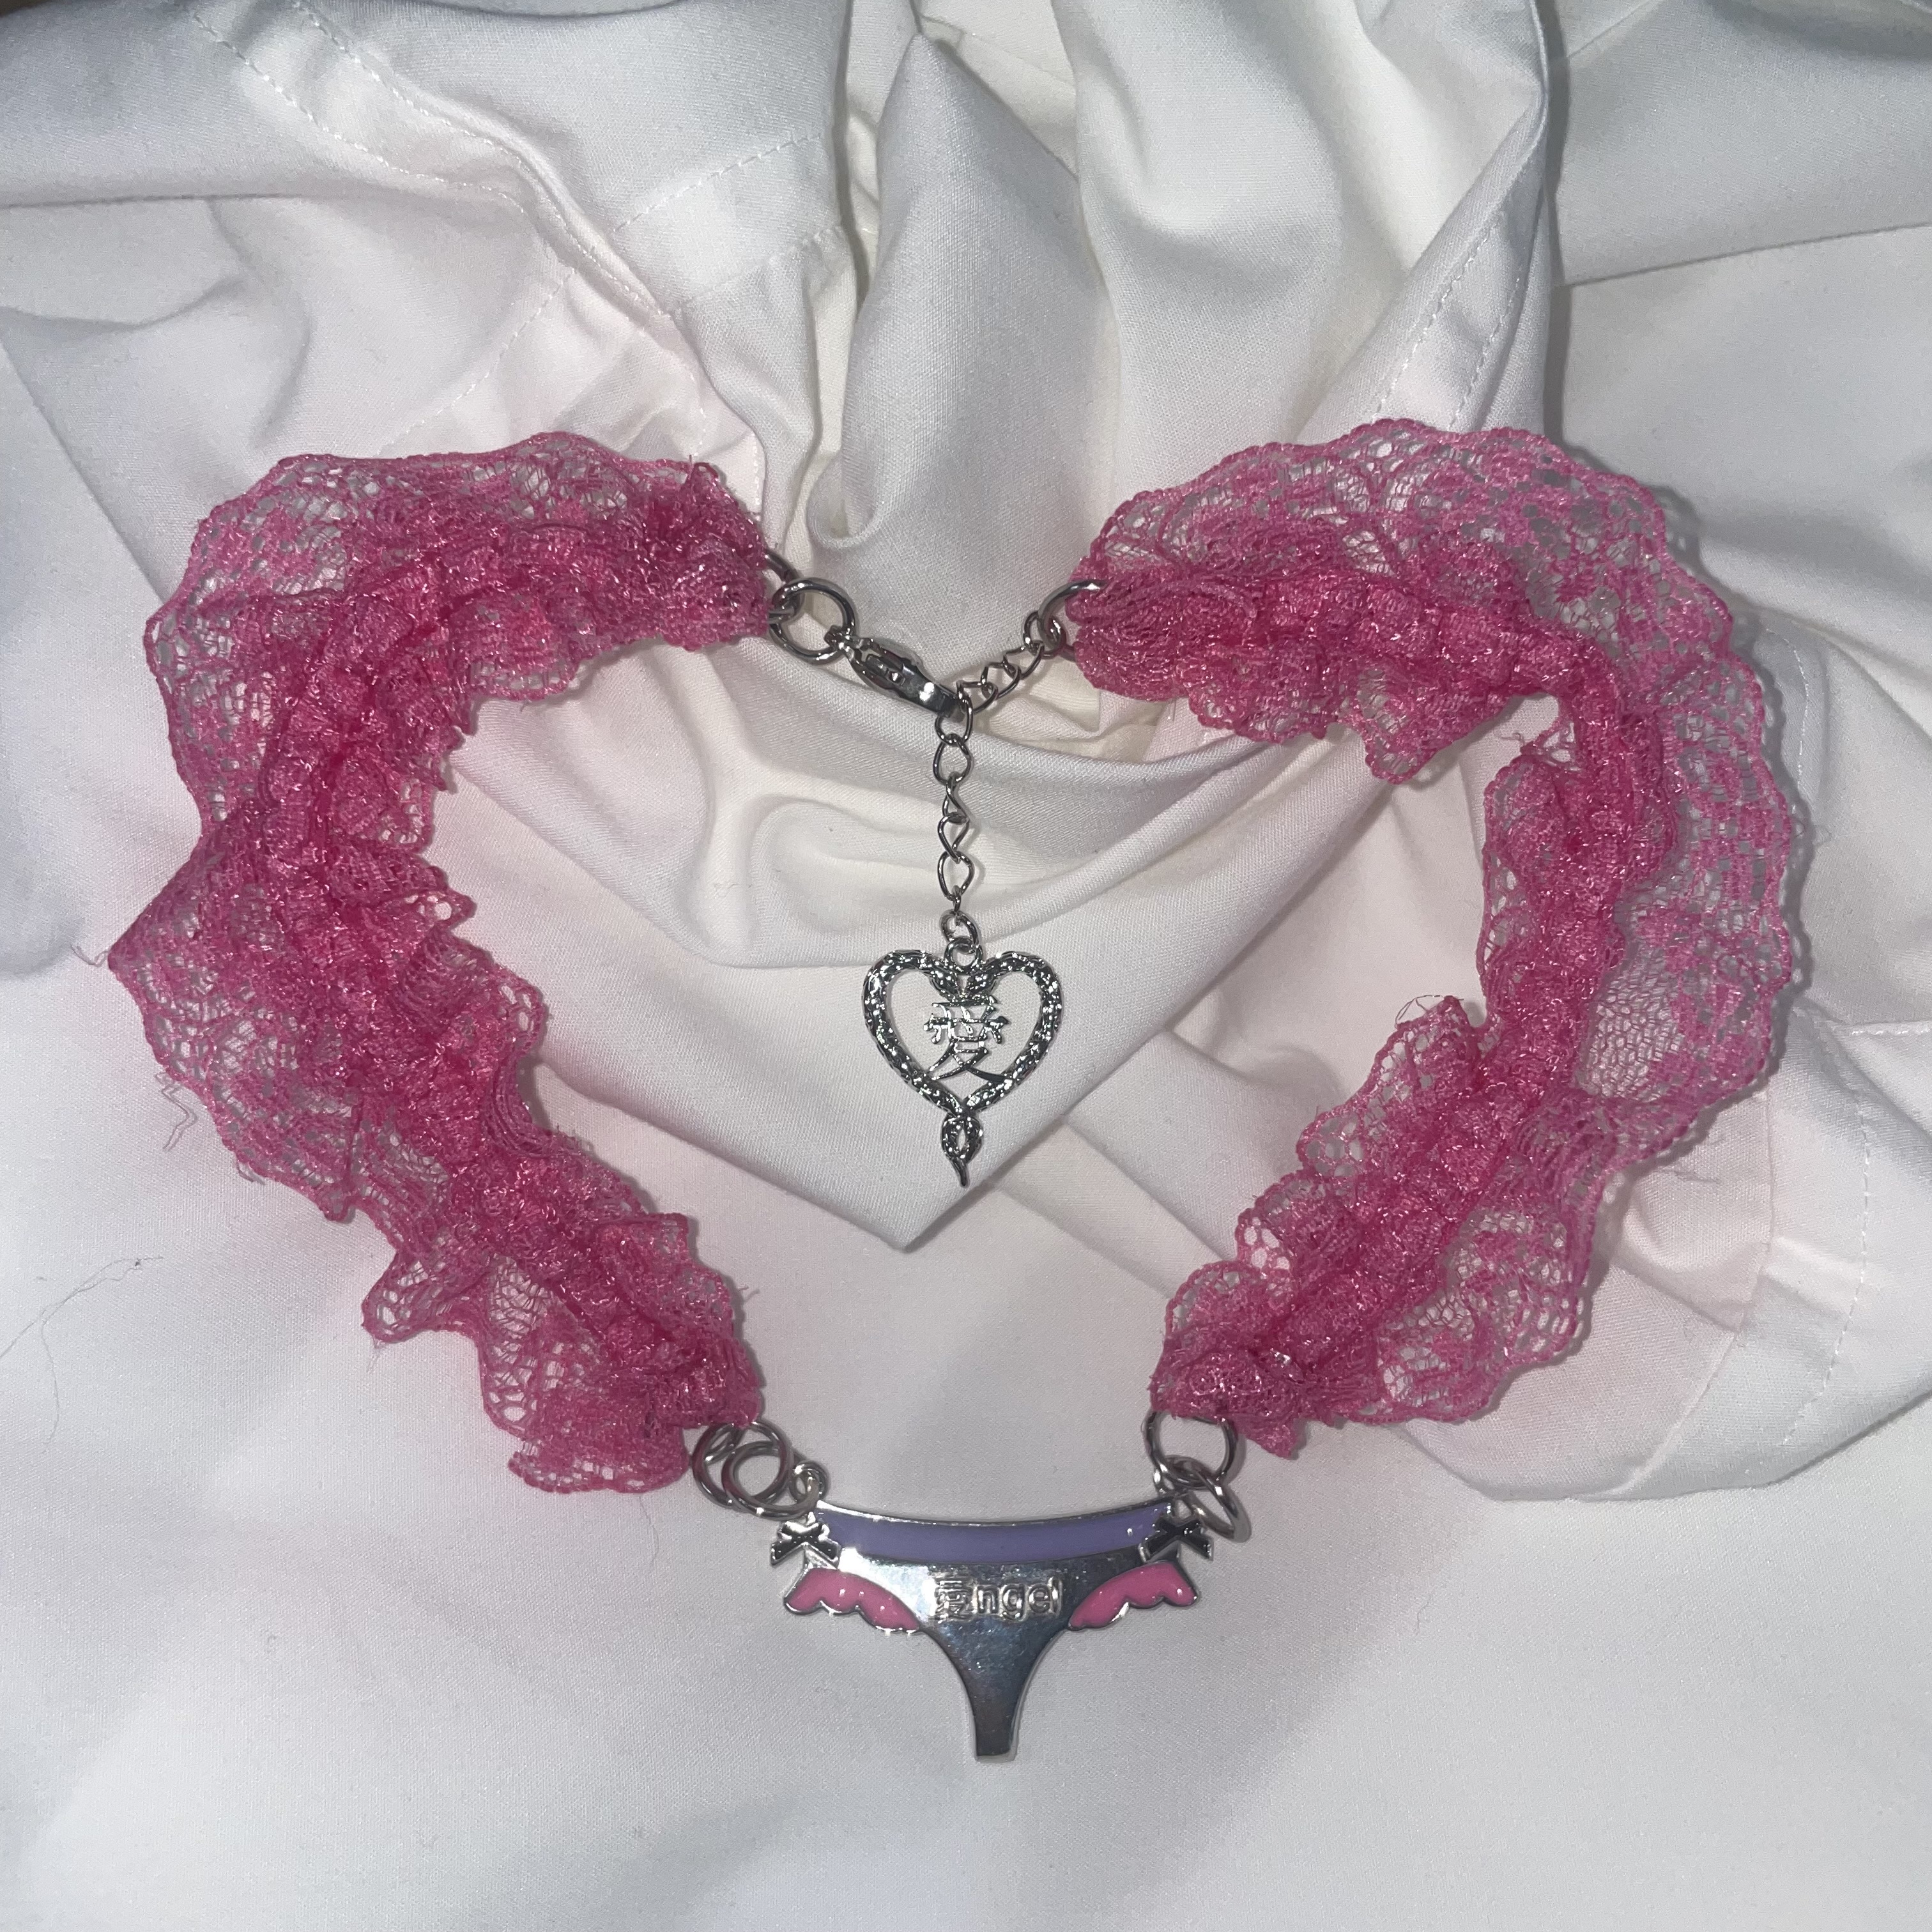 Angel lace necklace - pink